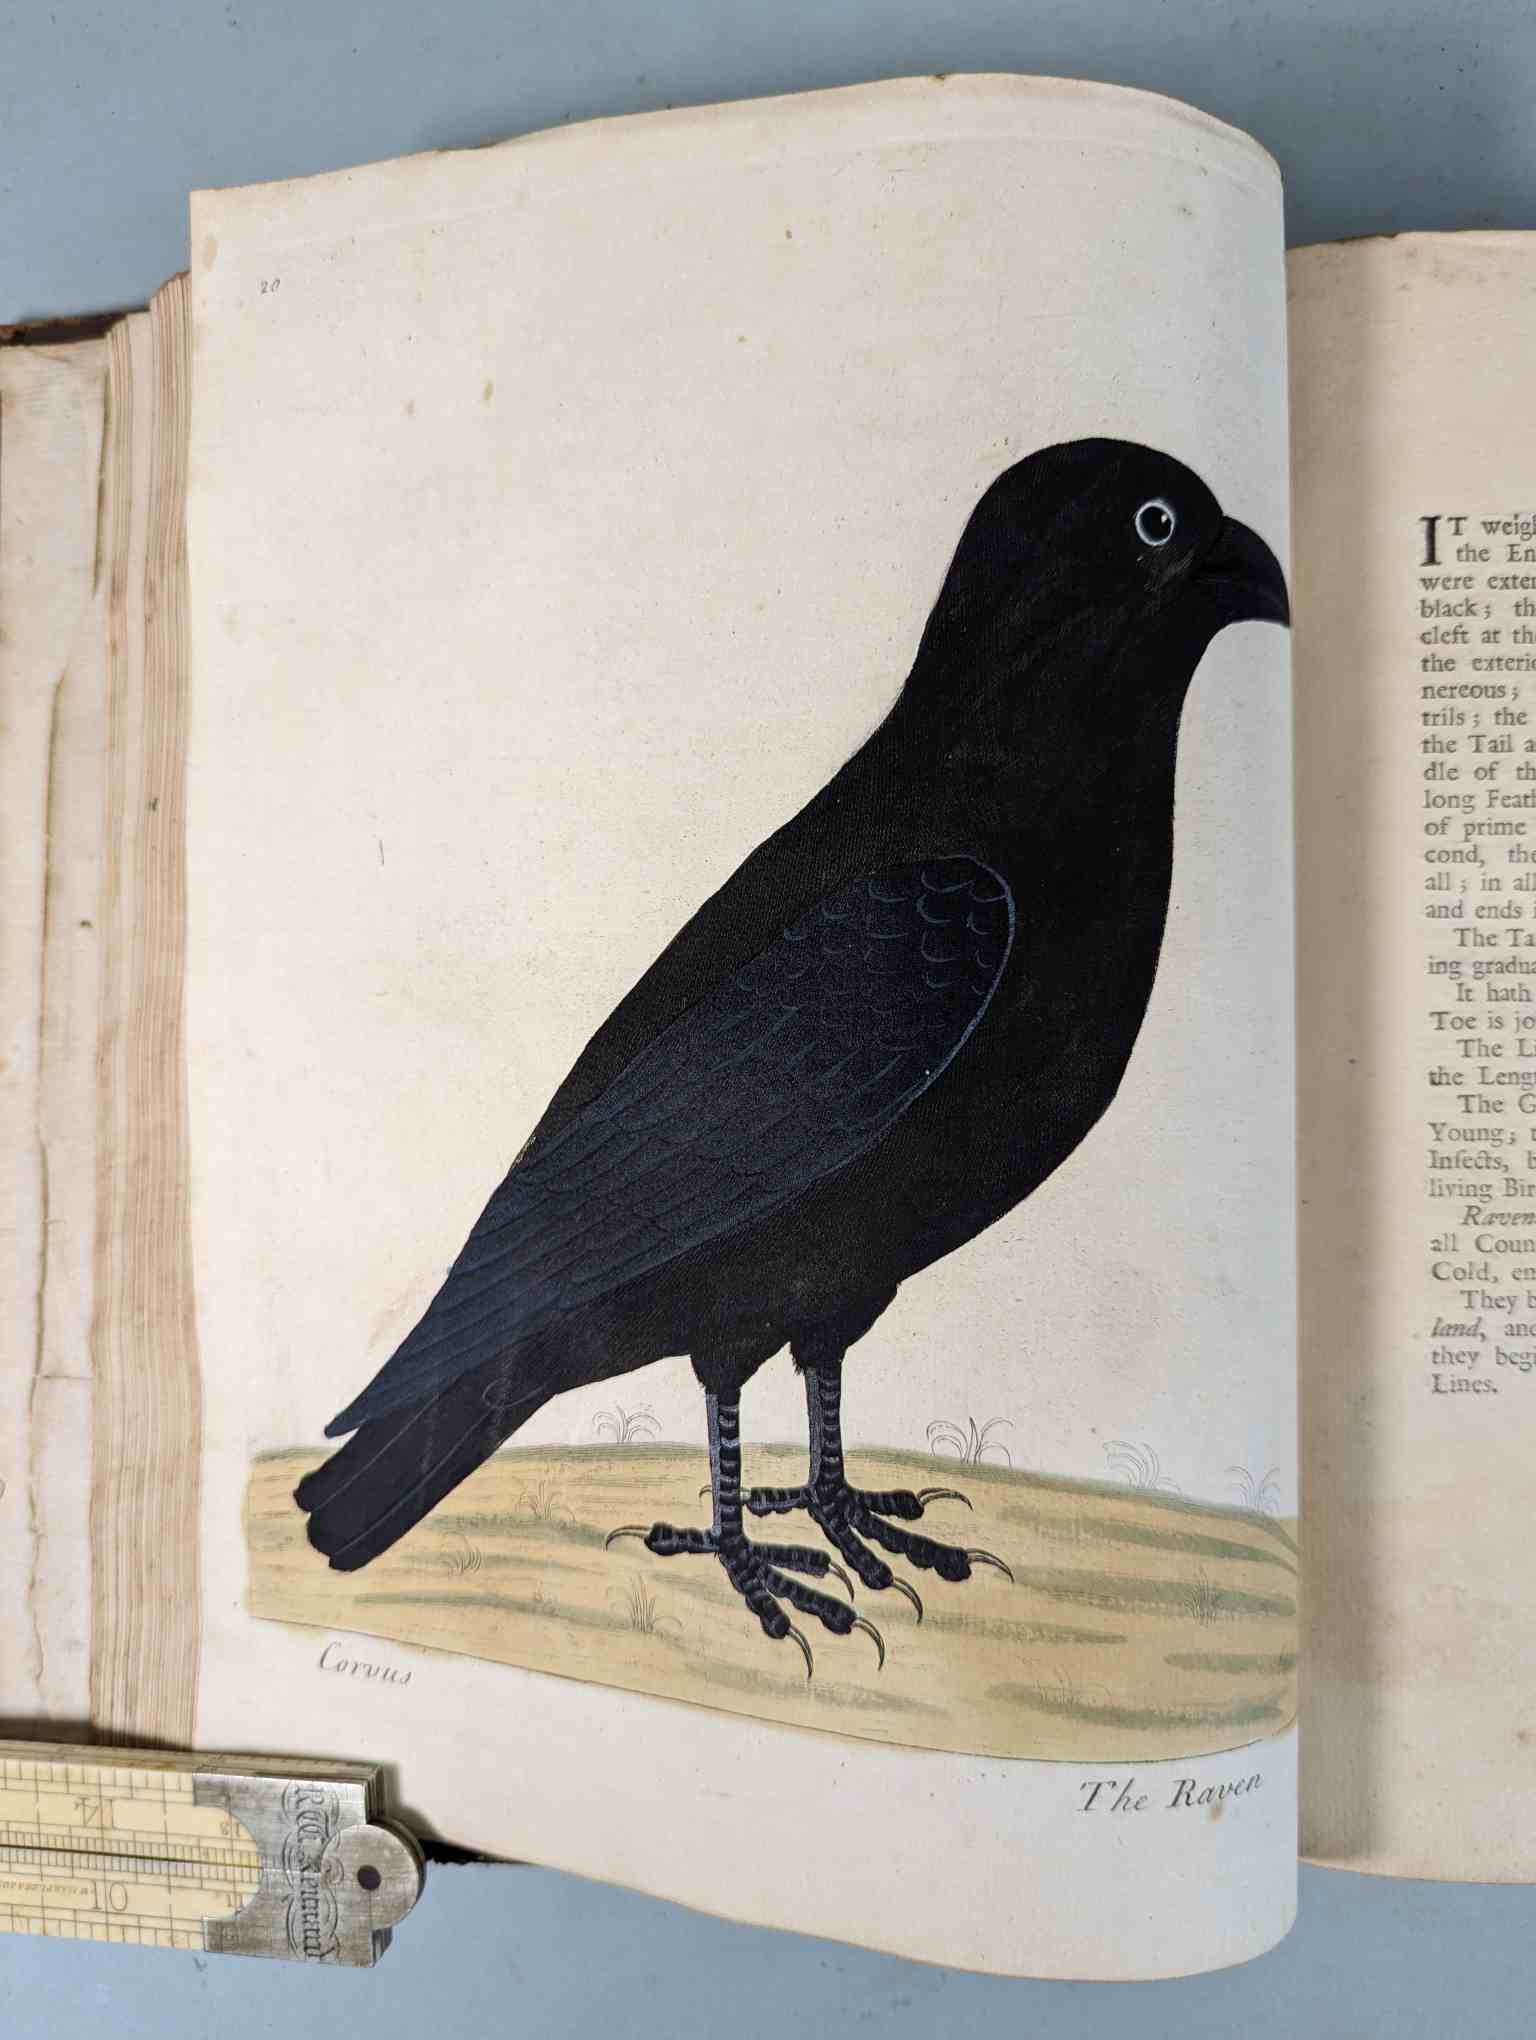 ALBIN, Eleazar. A Natural History of Birds, to which are added, Notes and Observations by W. - Image 124 of 208